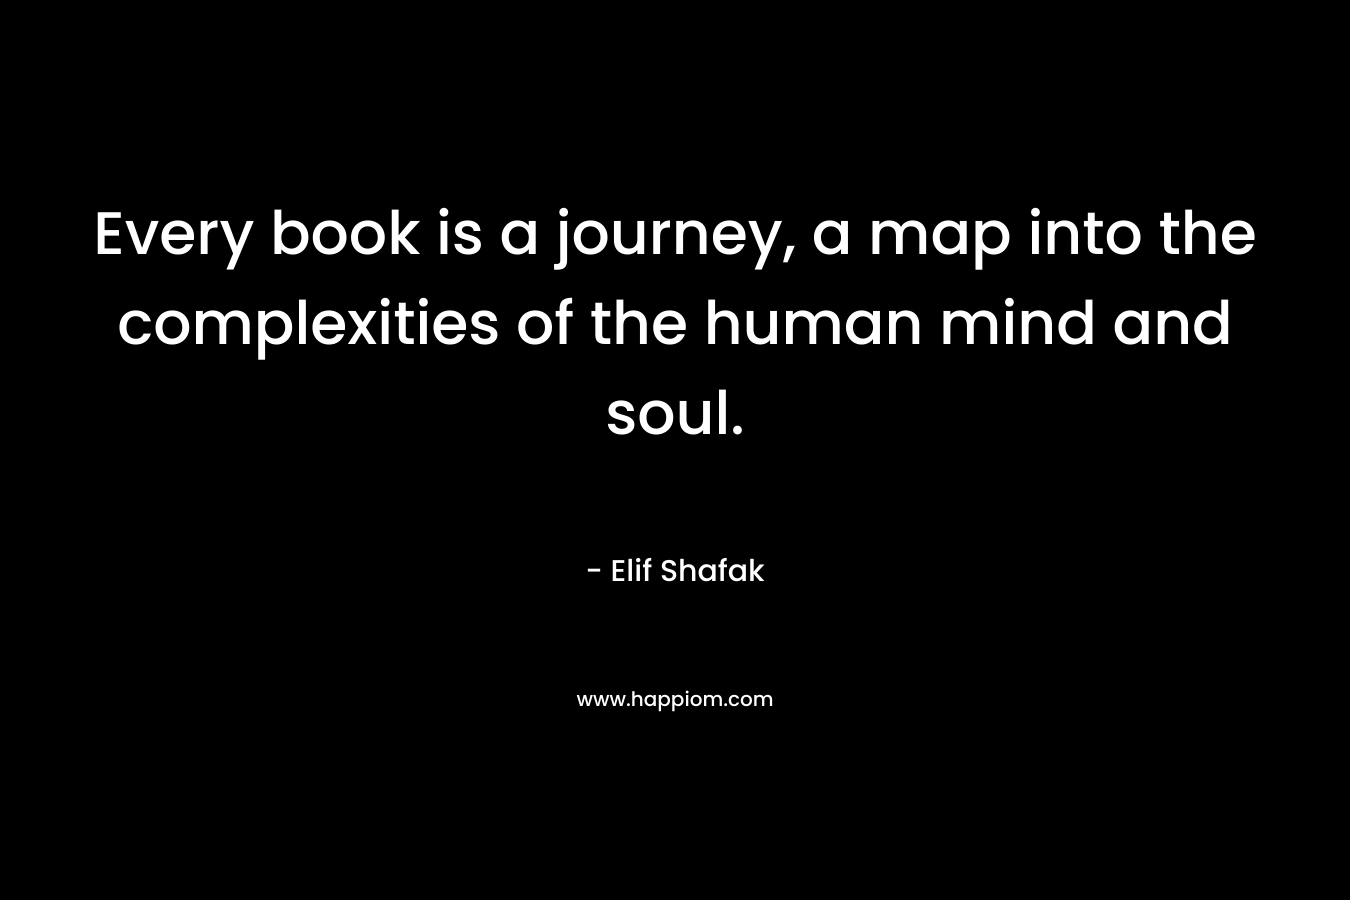 Every book is a journey, a map into the complexities of the human mind and soul. – Elif Shafak